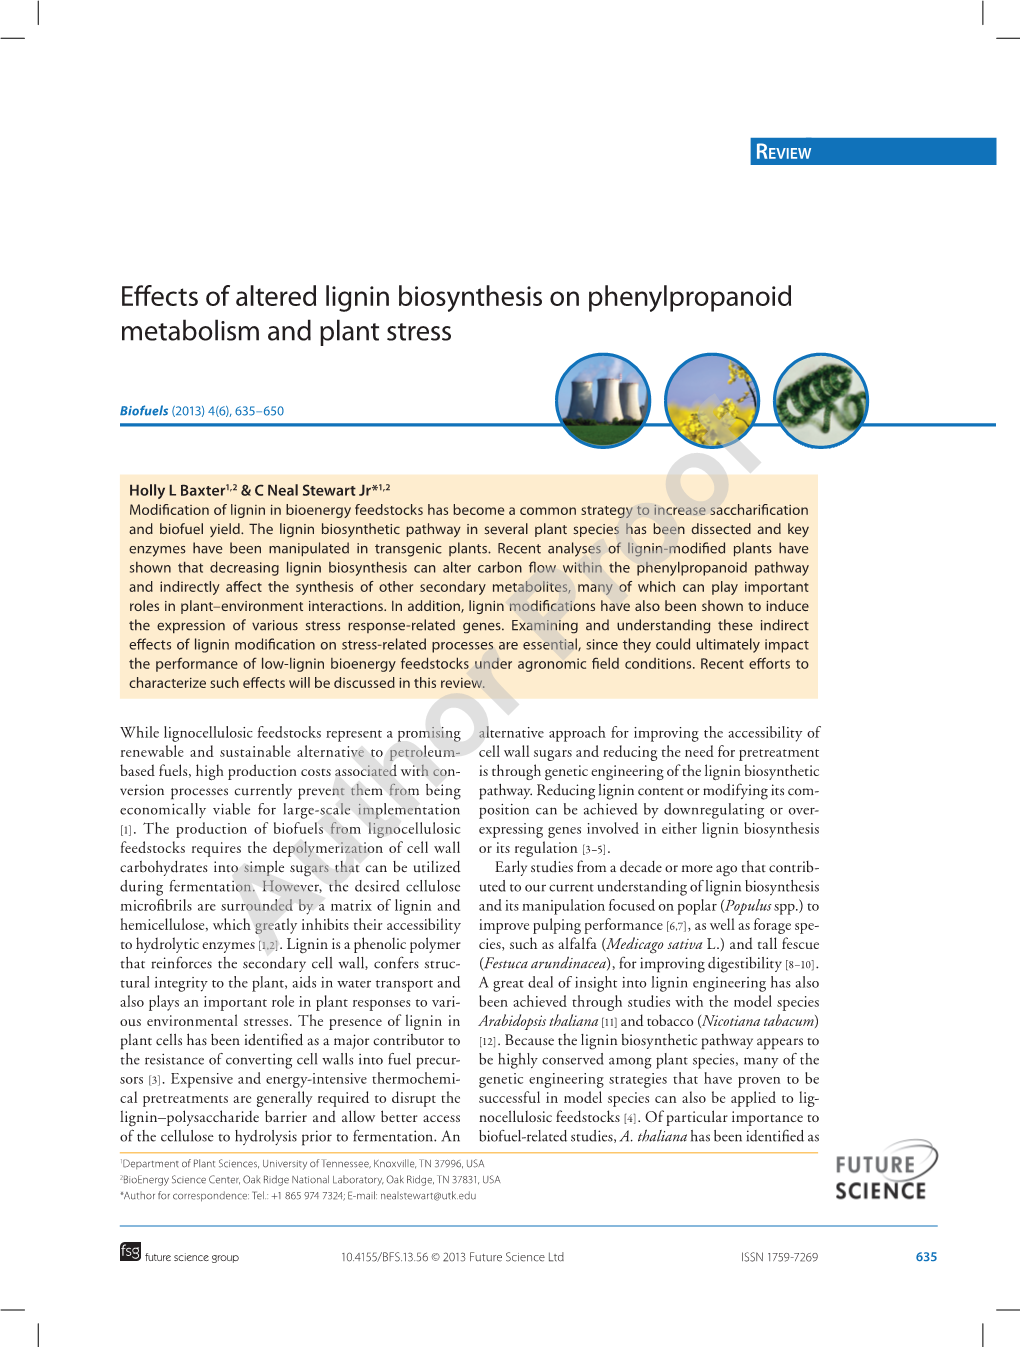 Effects of Altered Lignin Biosynthesis on Phenylpropanoid Metabolism and Plant Stress